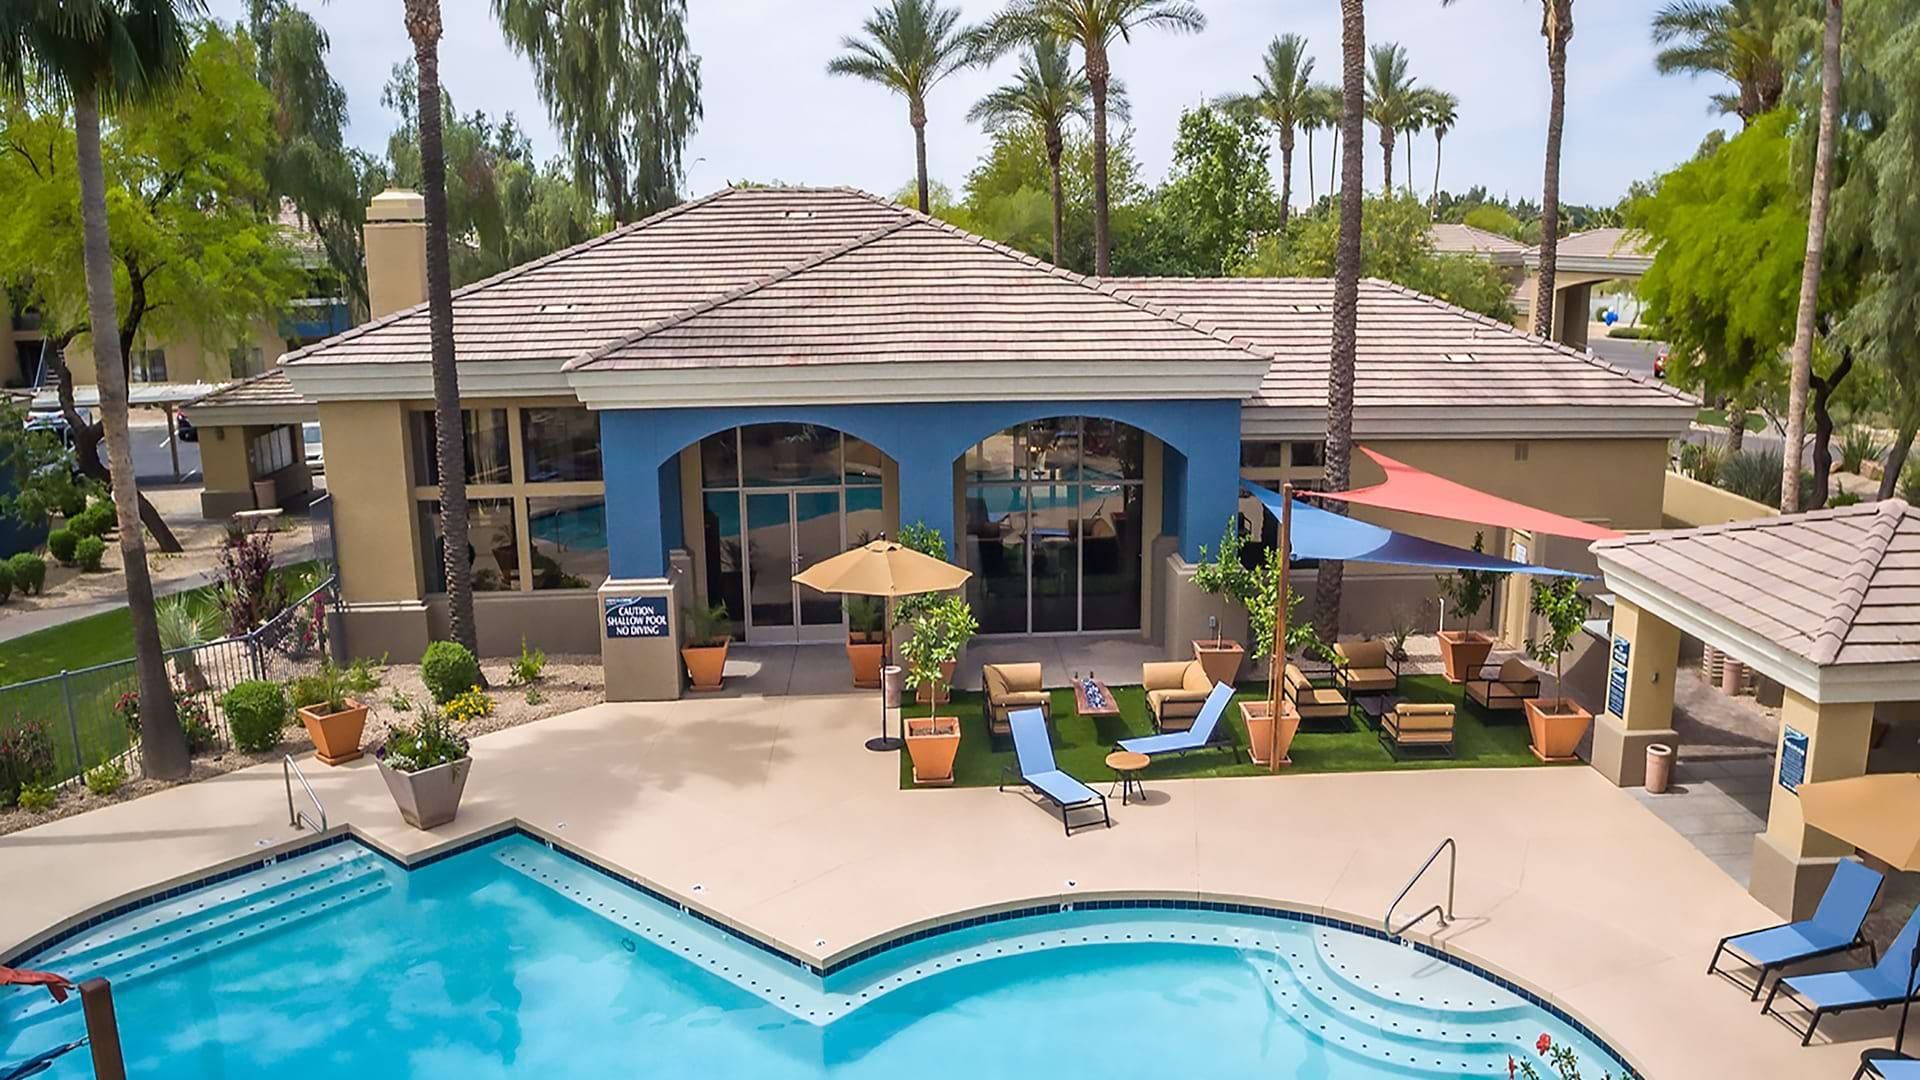 Resort-Style Pool and Lounge Chairs at Our Glendale Apartments